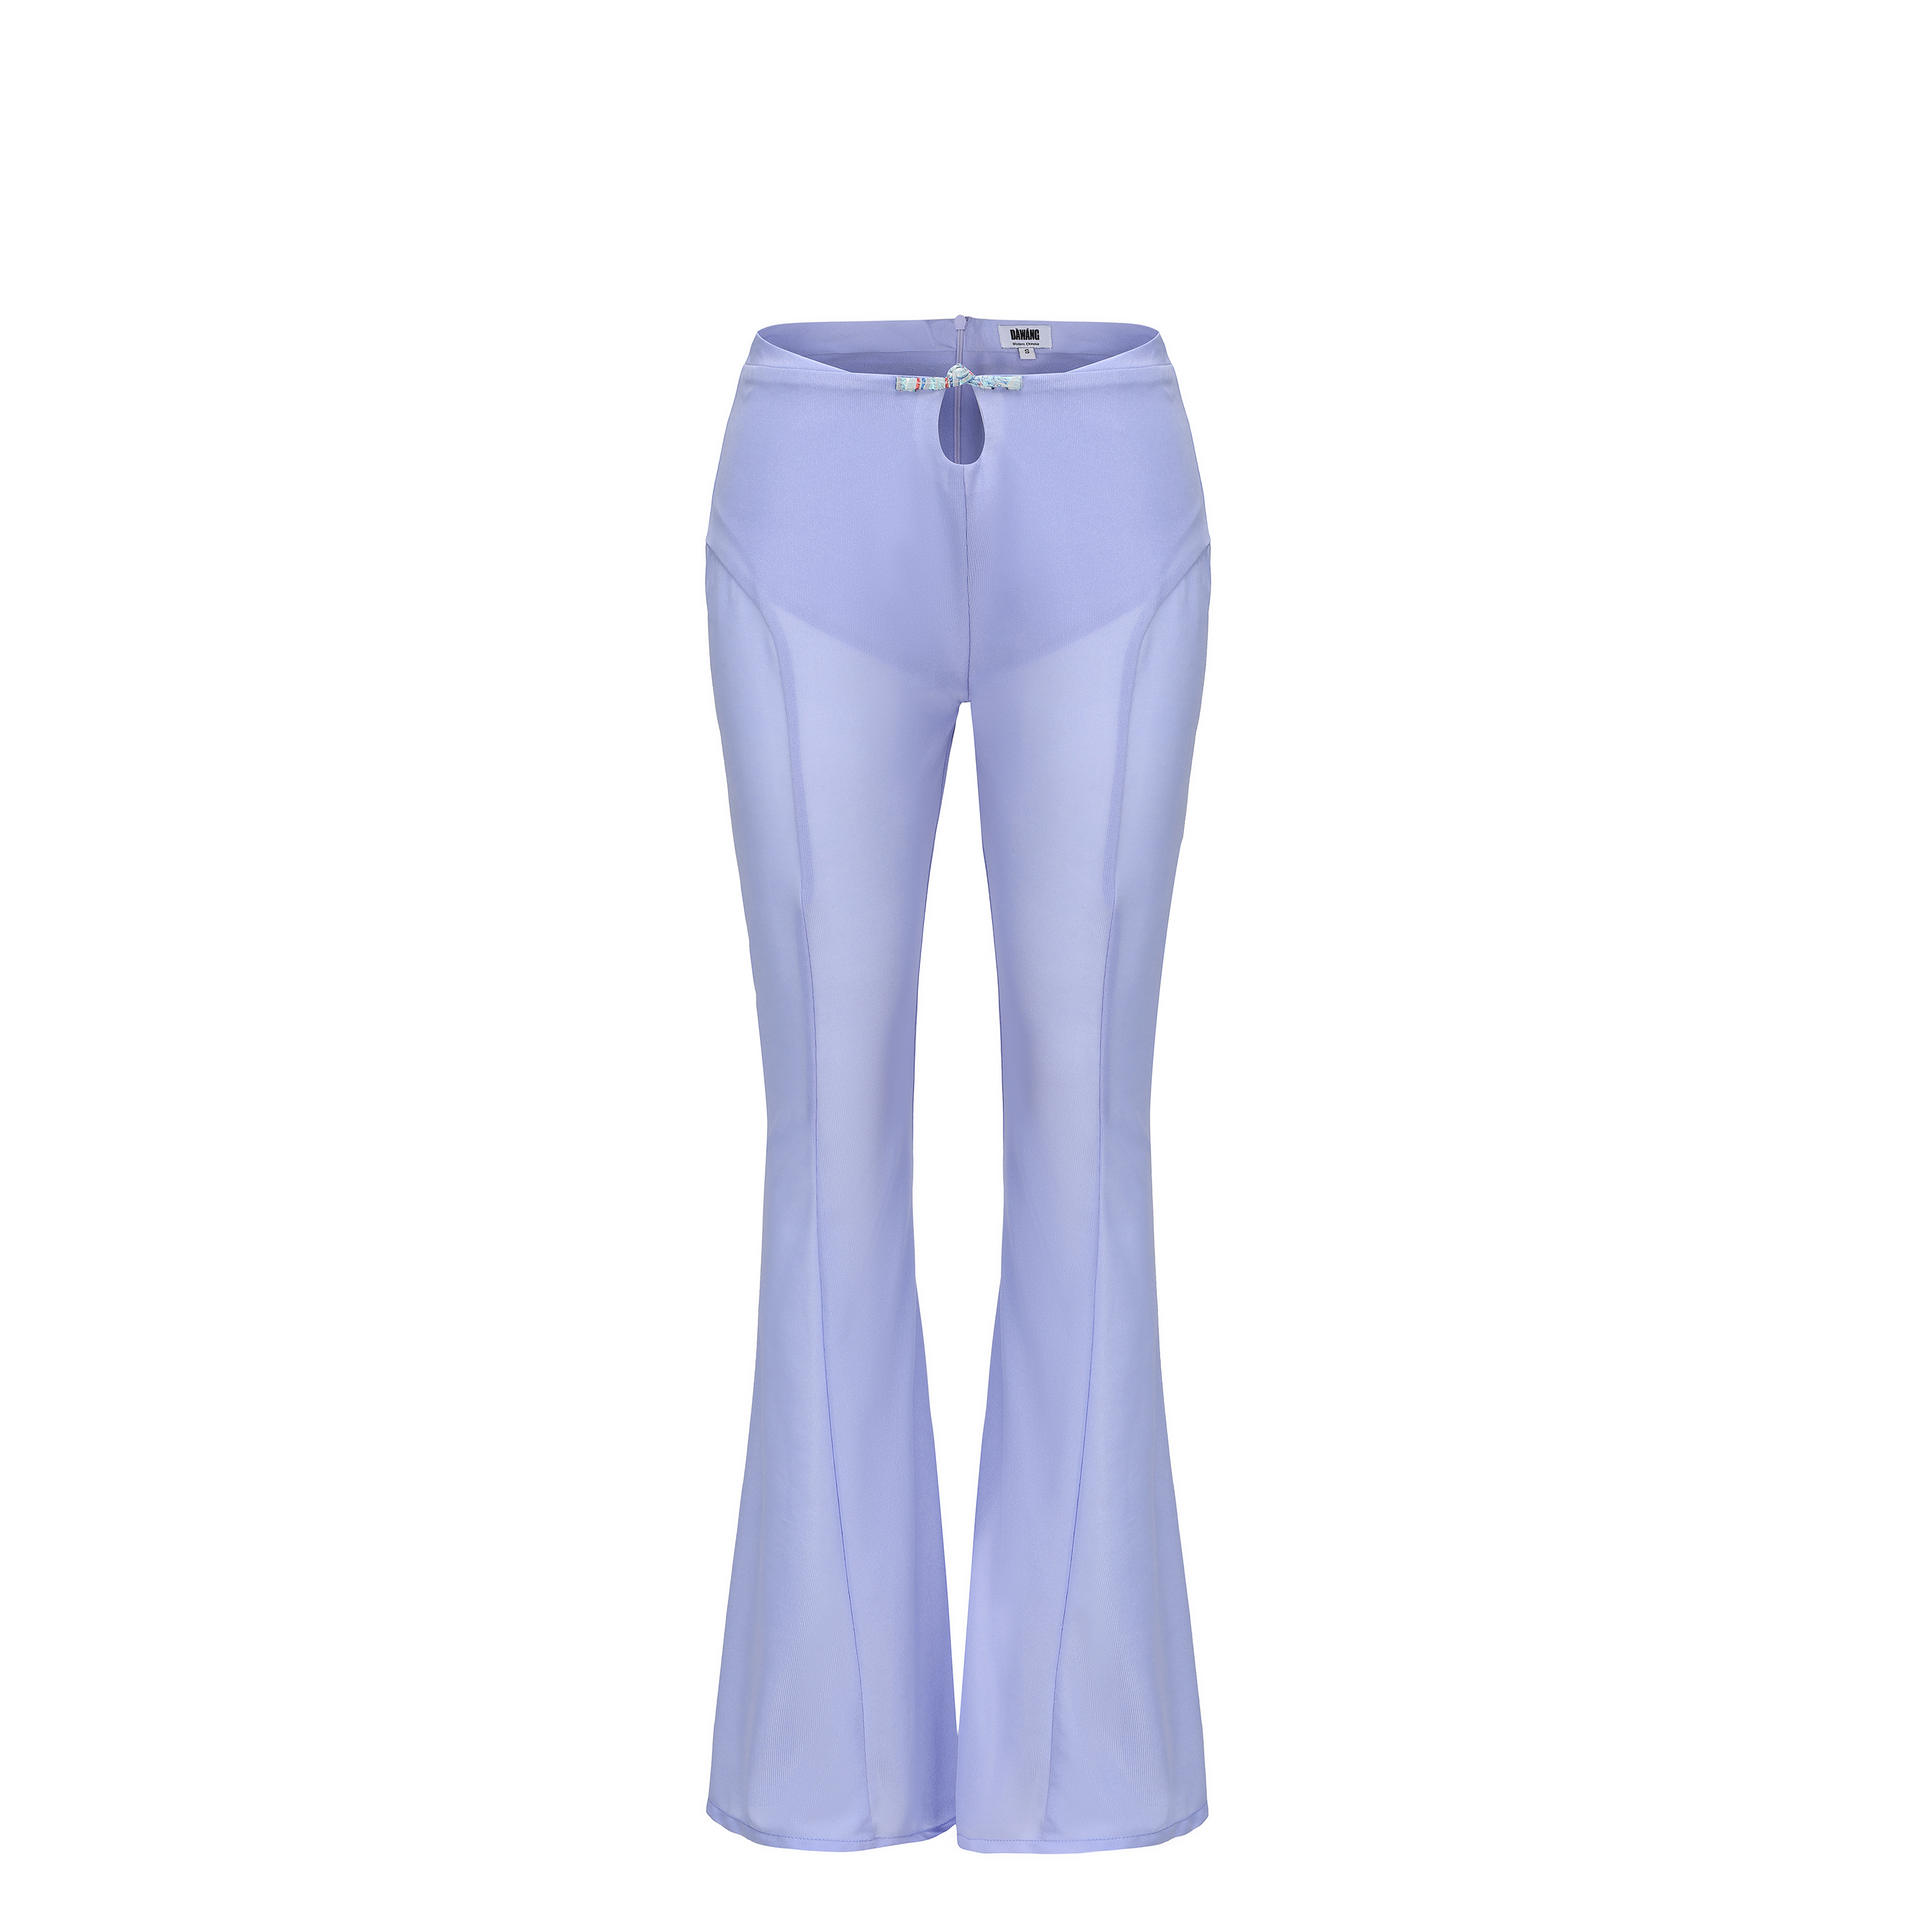 Meng Mid Rise Flare Pants, MID-RISE - WIDE-LEG - FULL LENGTH, Stretch Knit Fabric and Lining, Brocade Knot Button Center Front, lavender, front